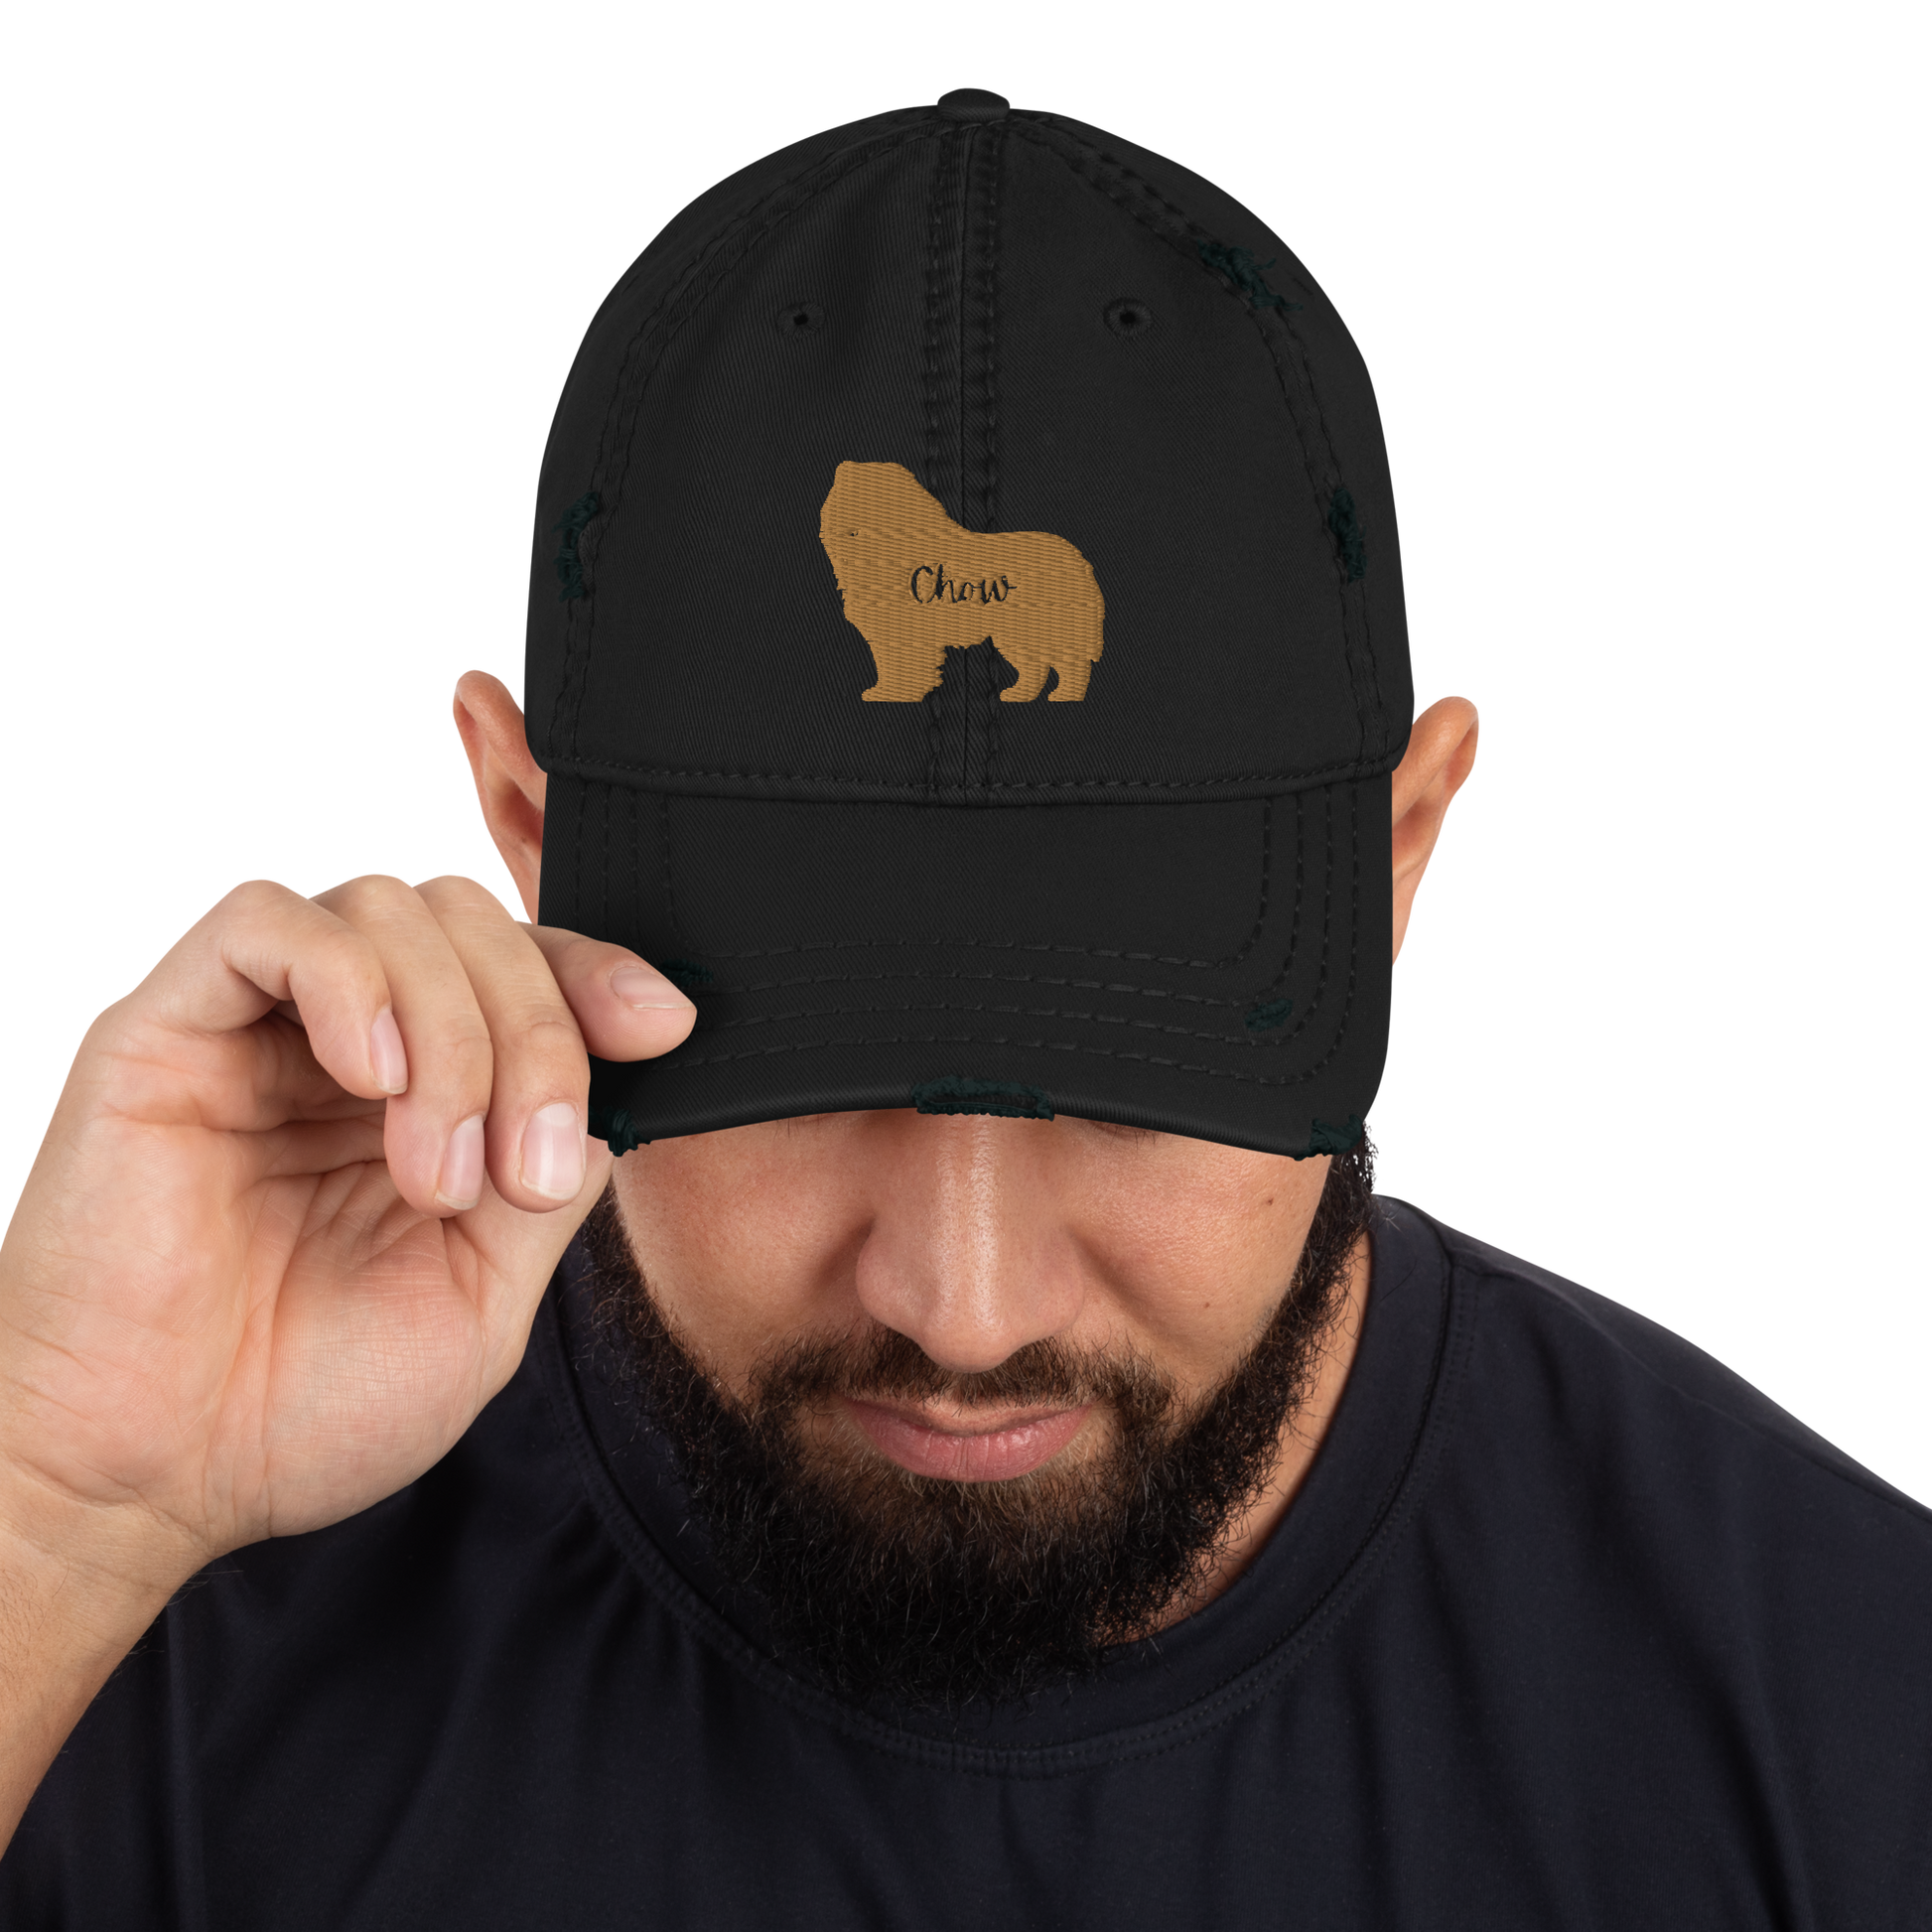 Chow Chow Theme Hat